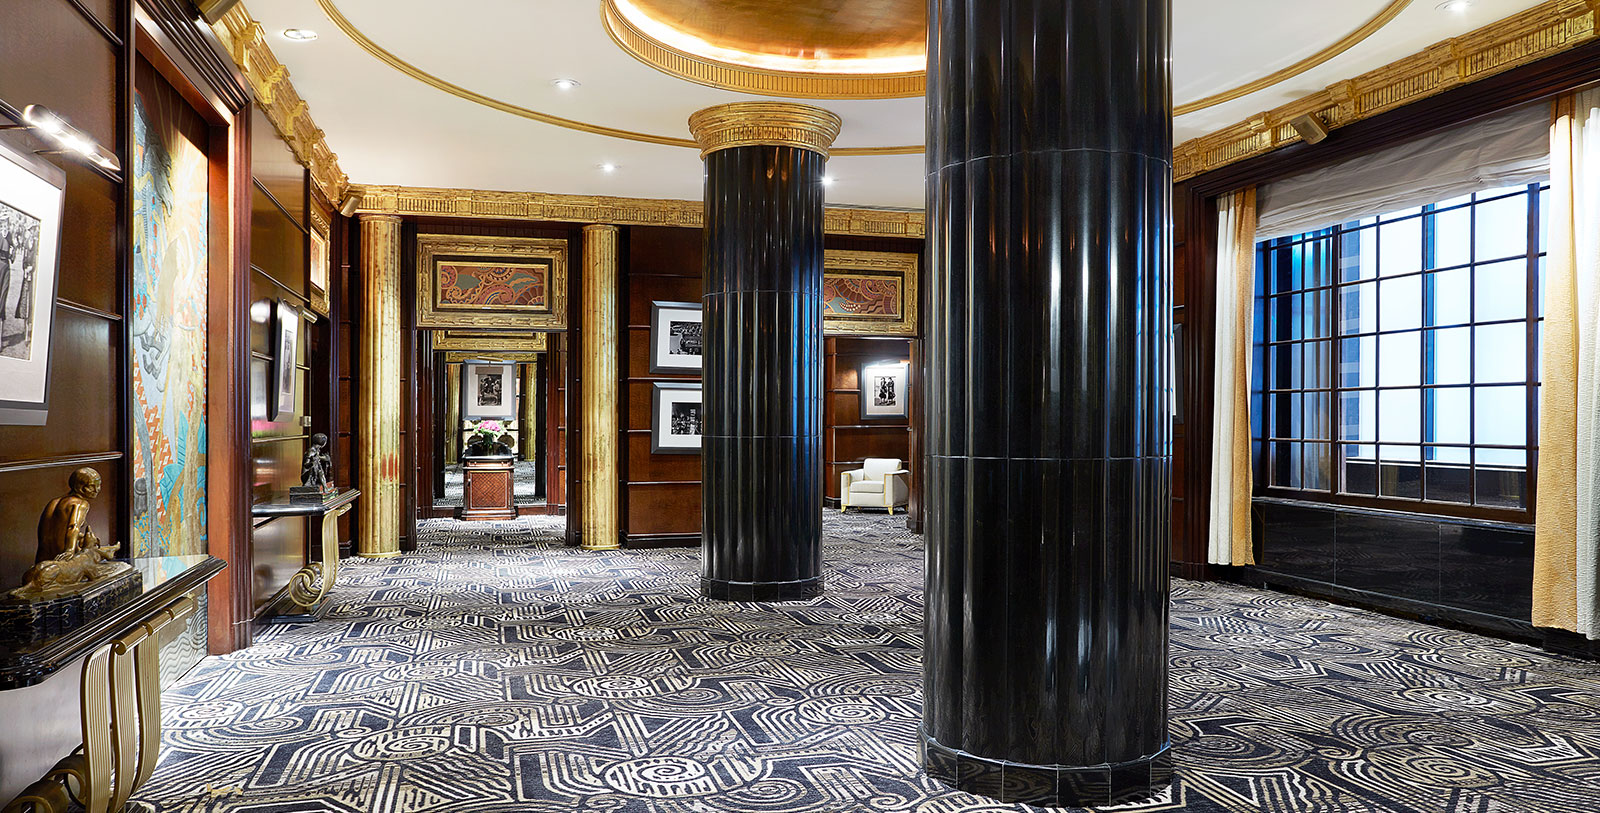 Discover the Art Deco architecture of the JW Marriott Essex House.